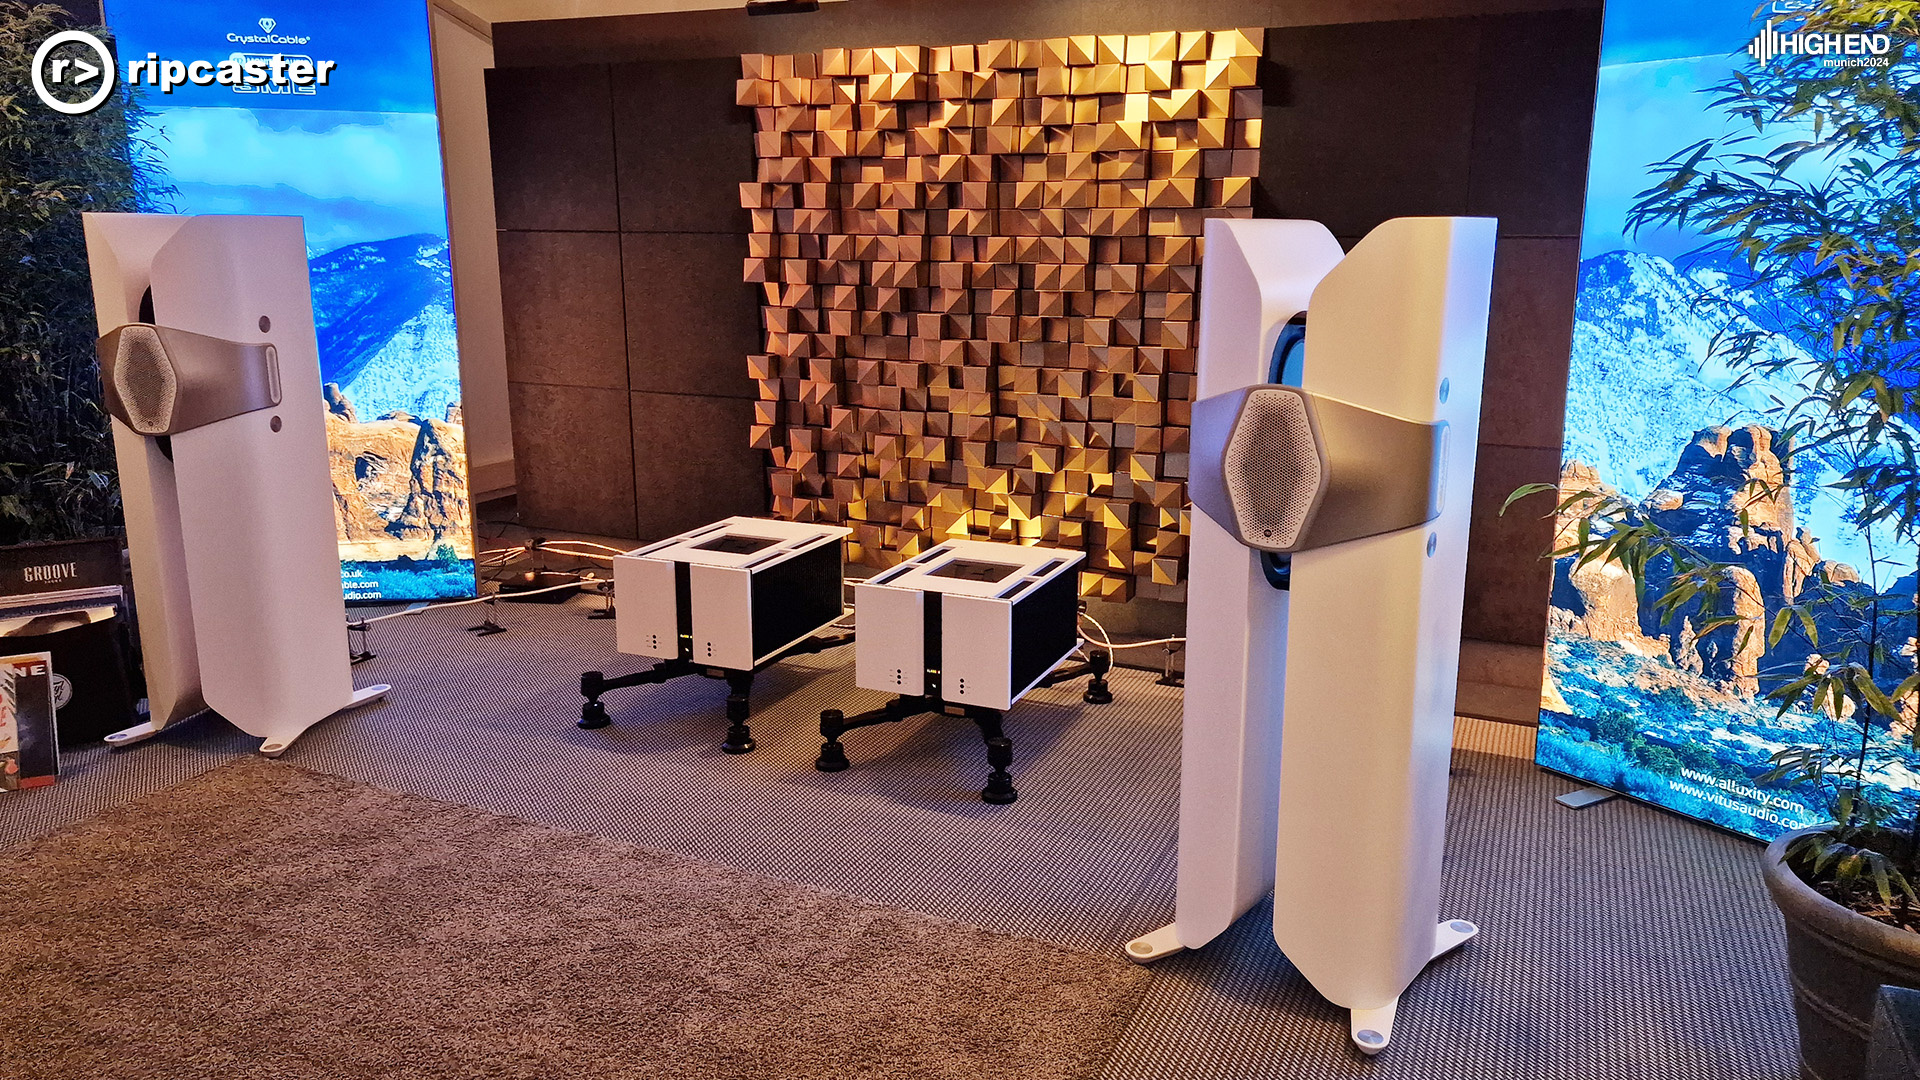 Two large floor standing speakers in white.  They resemble large pegs.  Between them are two HiFi units on stands.